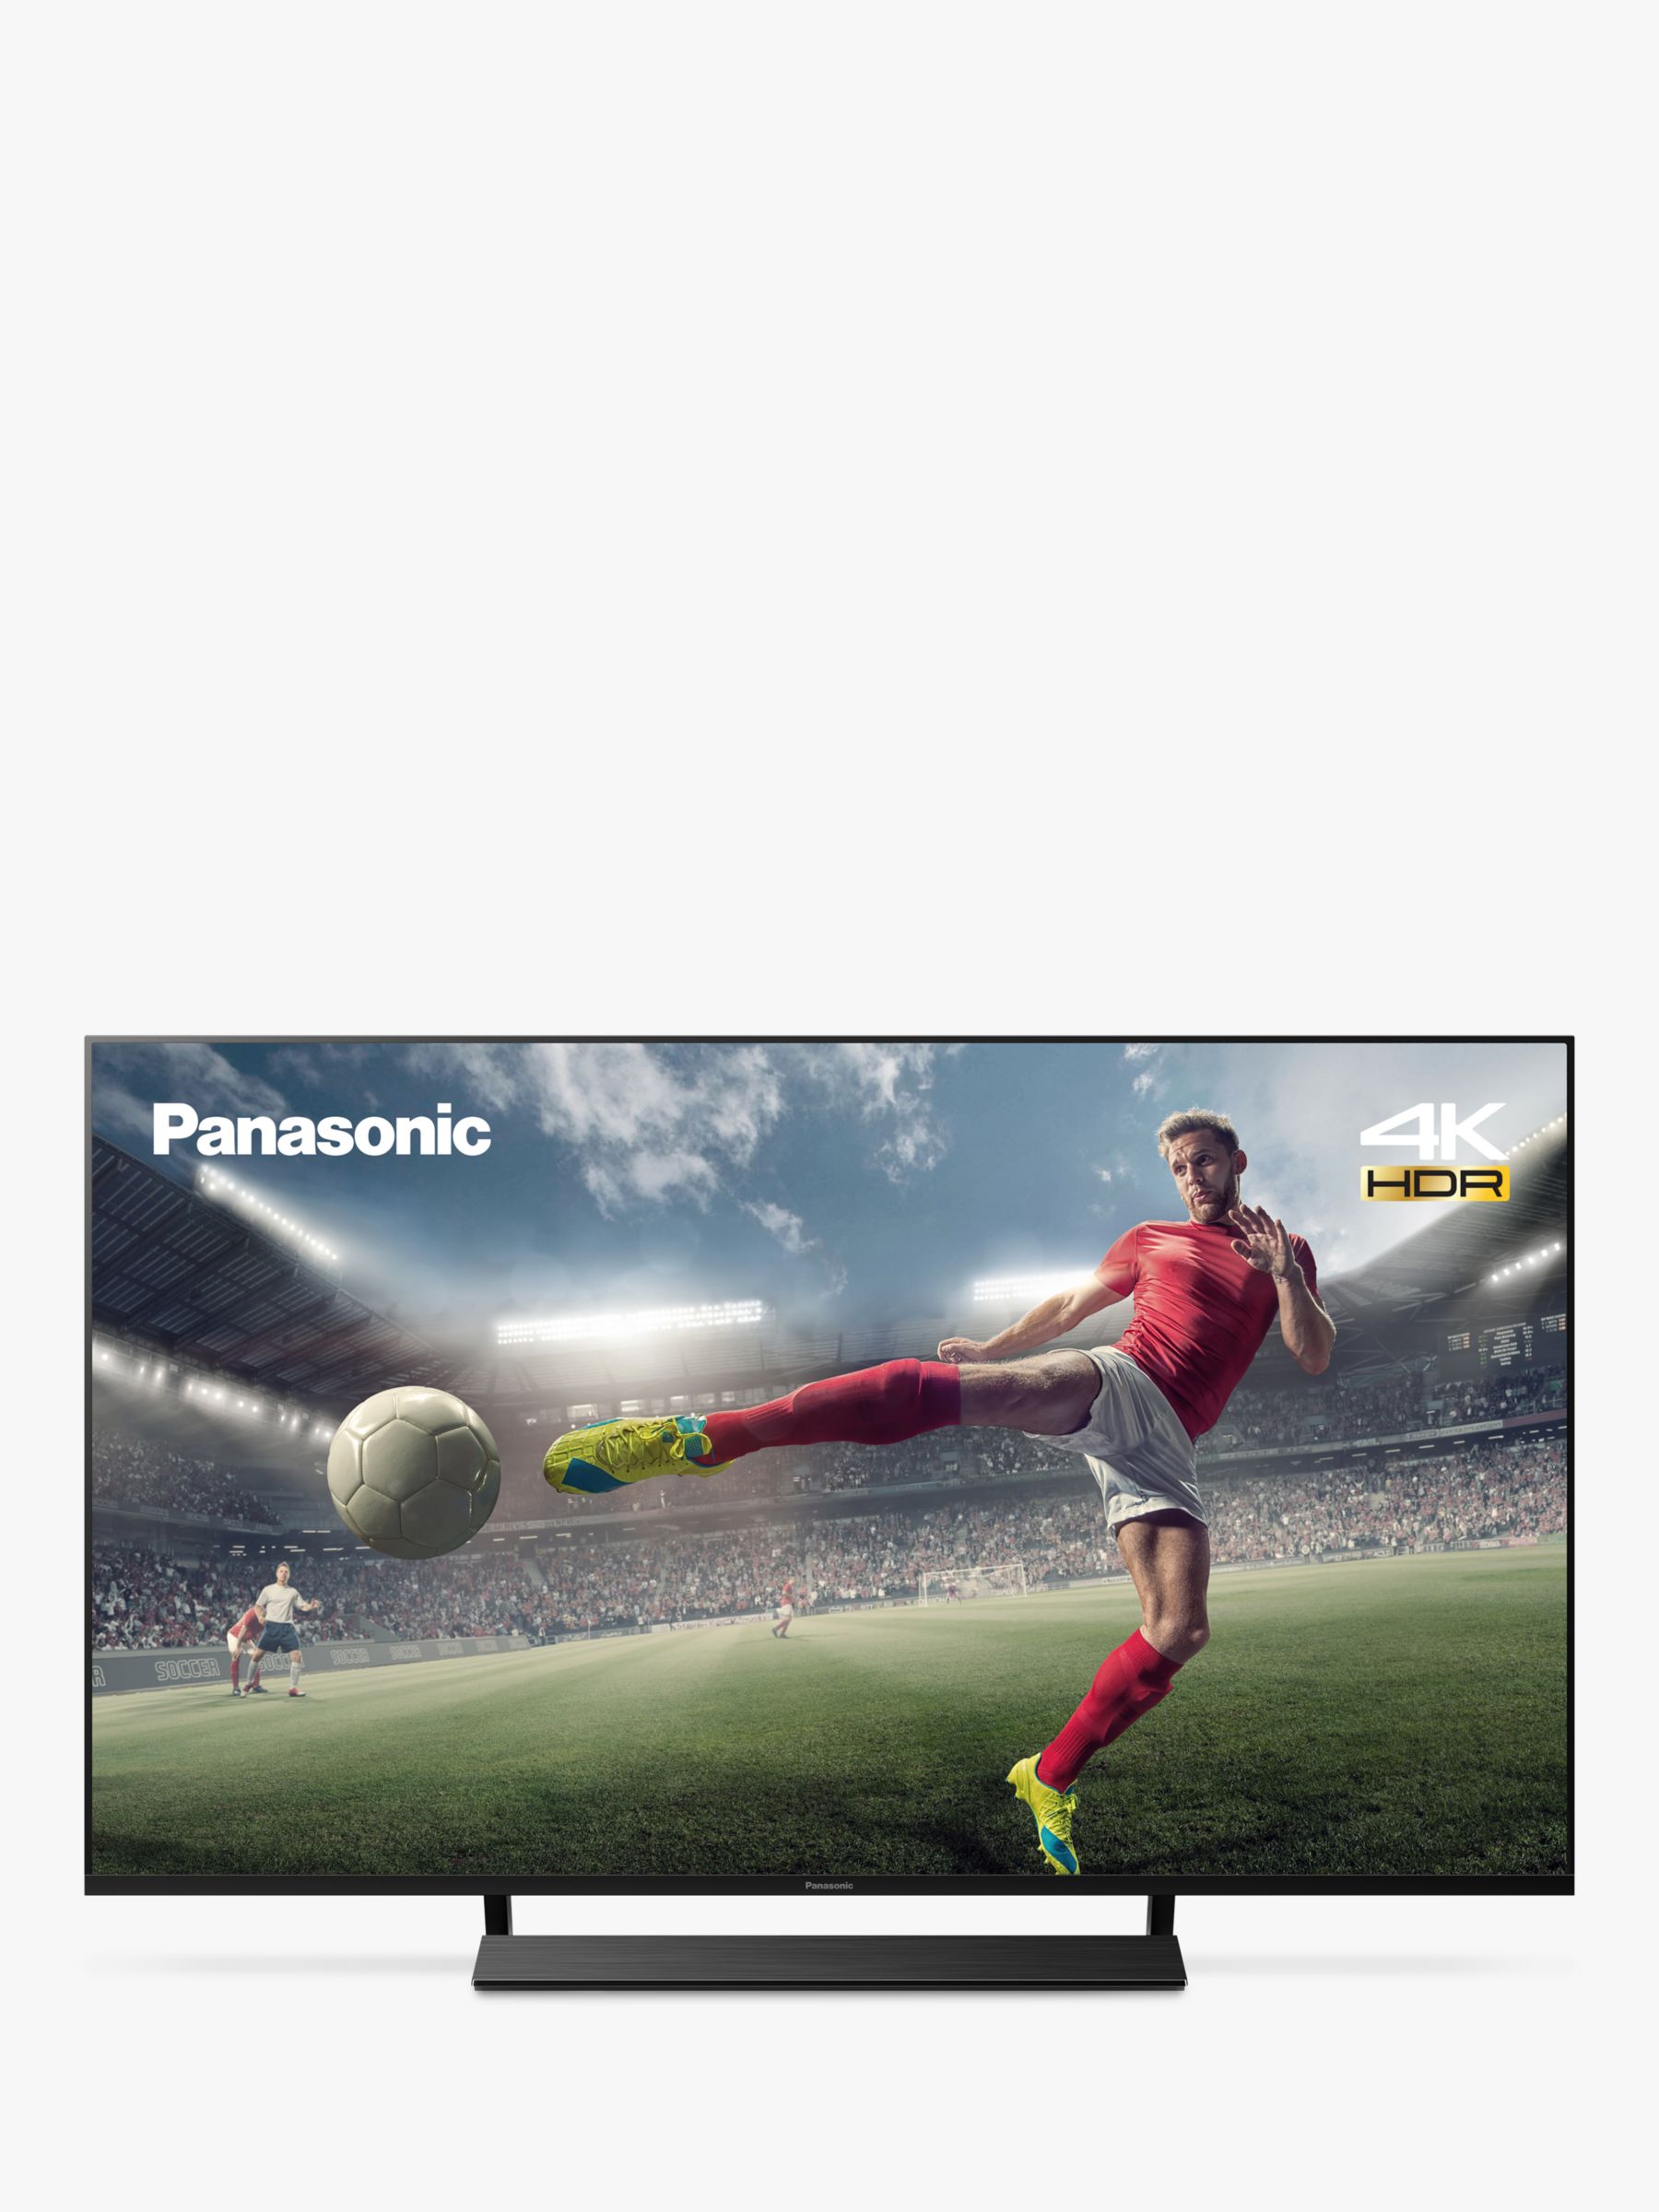 Panasonic TX-50JX870B (2021) LED HDR 4K Ultra HD Smart TV, 50 inch with Freeview Play & Dolby Atmos, Black